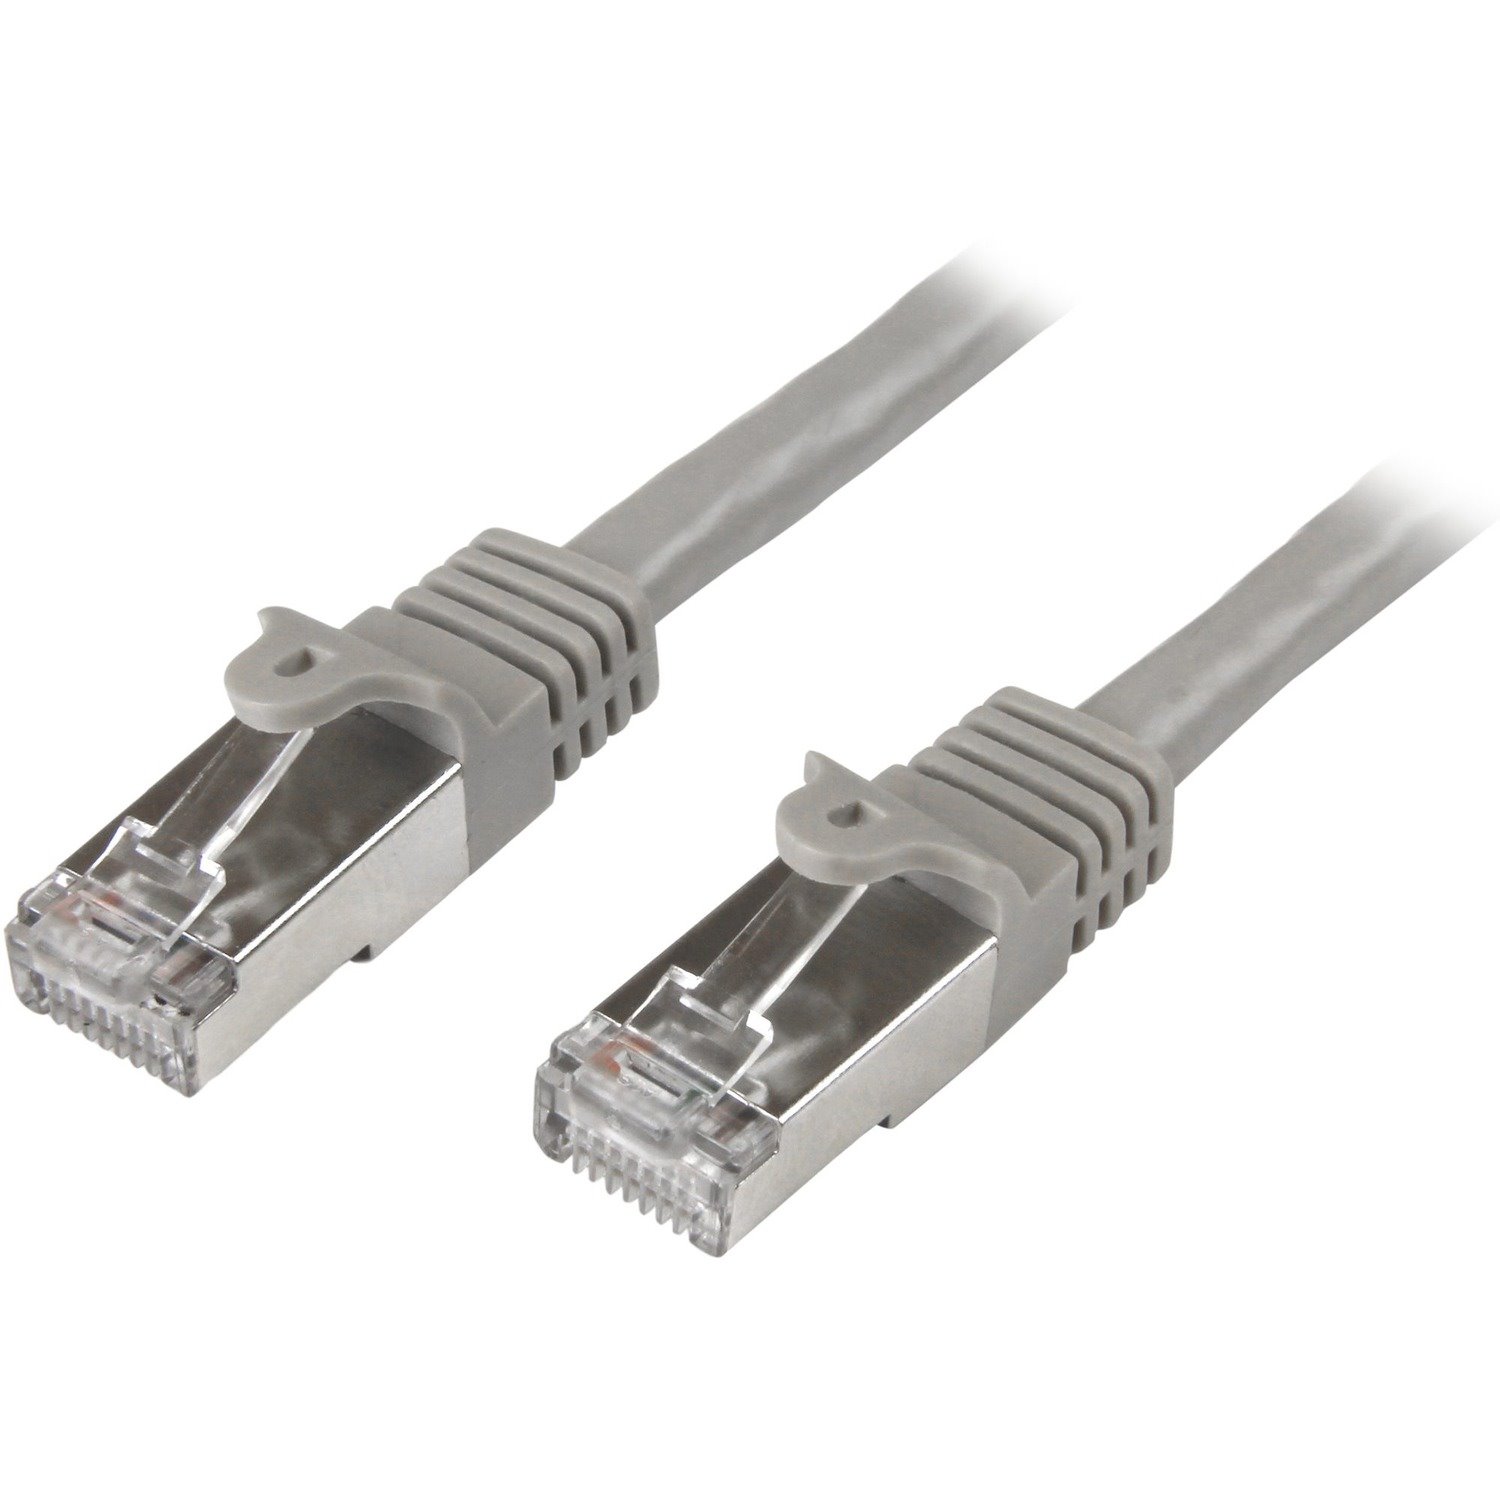 StarTech.com 2m Cat6 Patch Cable - Shielded (SFTP) Snagless Gigabit Network Patch Cable - Gray Cat 6 Ethernet Patch Lead